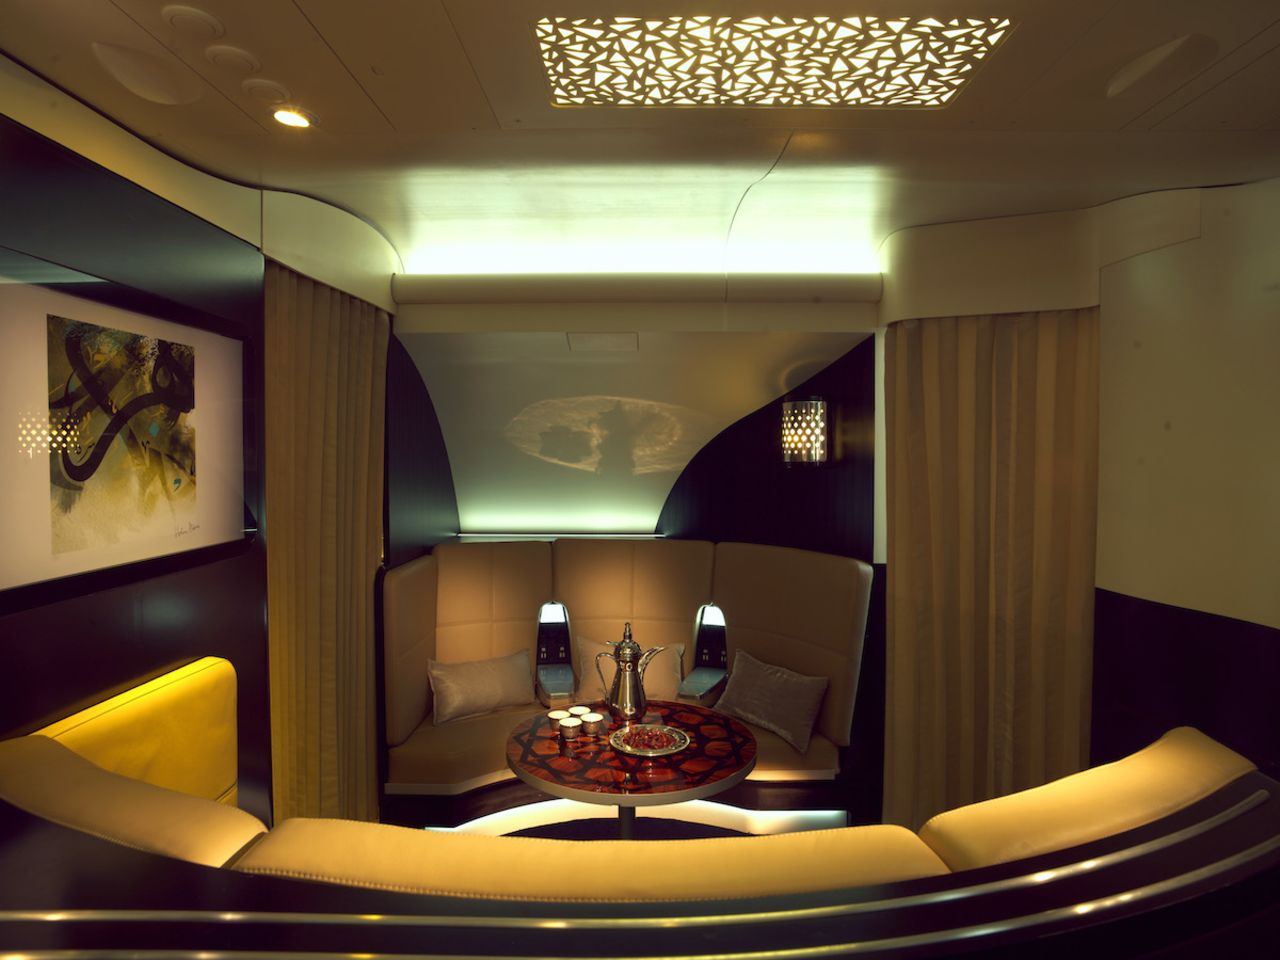 On the Airbus A380, first- and business-class fliers can chat with their moneyed counterparts in The Lobby, a serviced lounge located between the first and business cabins.